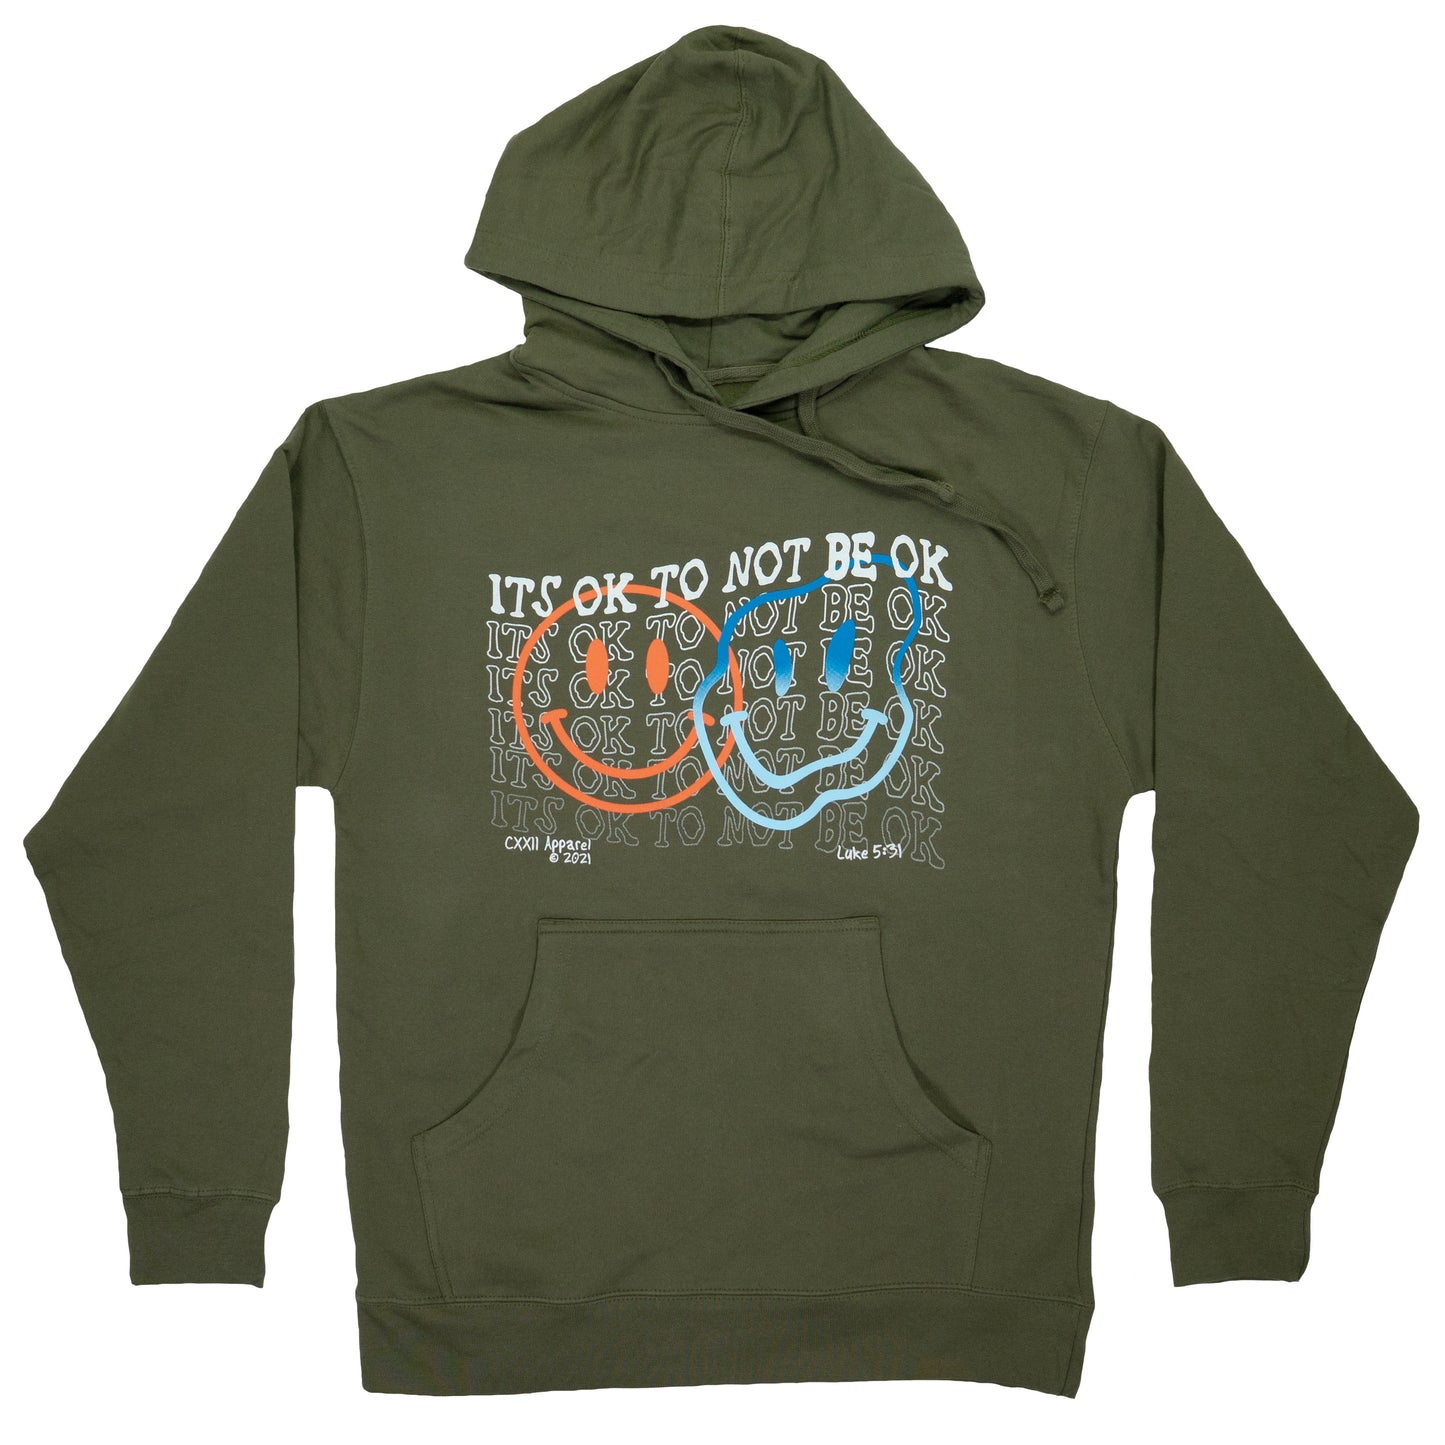 Its OK to Not be OK Army Green Wavy Hoodie